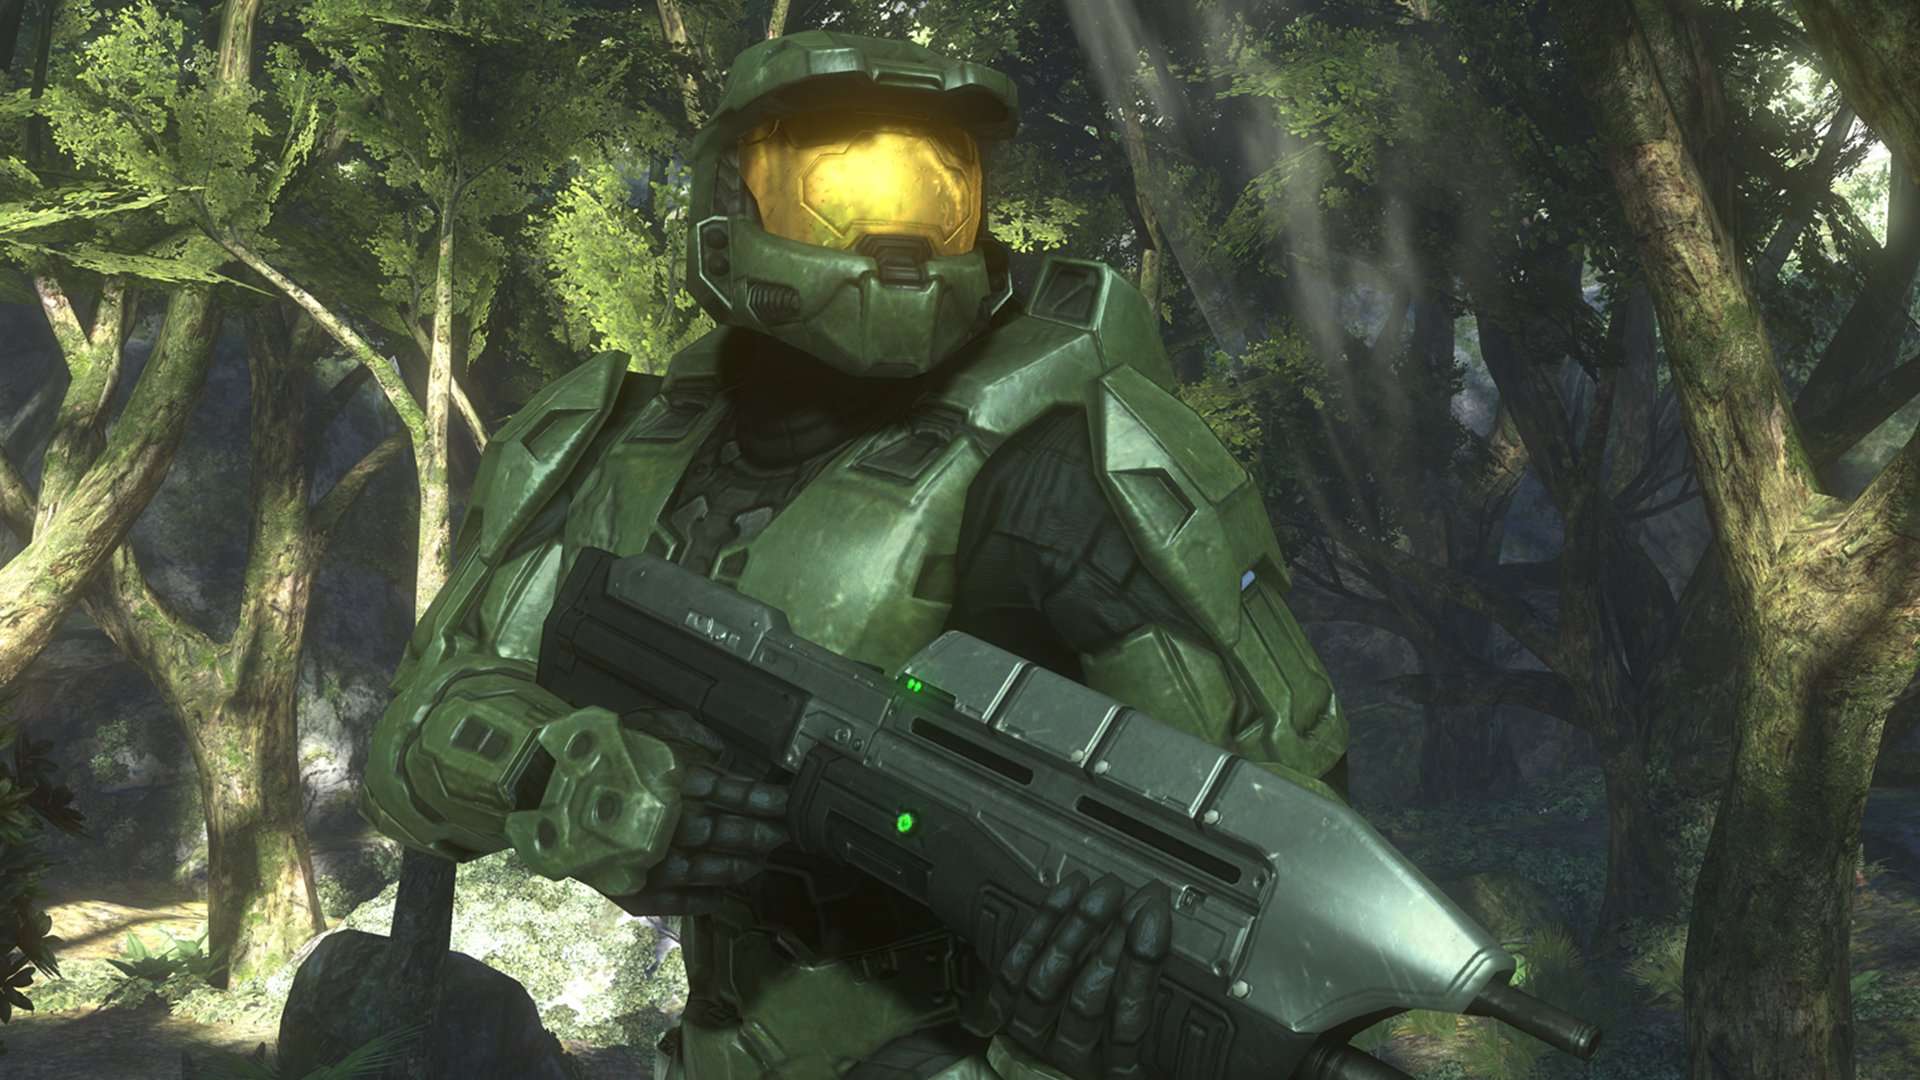 image for Halo: The Master Chief Collection for PC is reportedly “close to release”